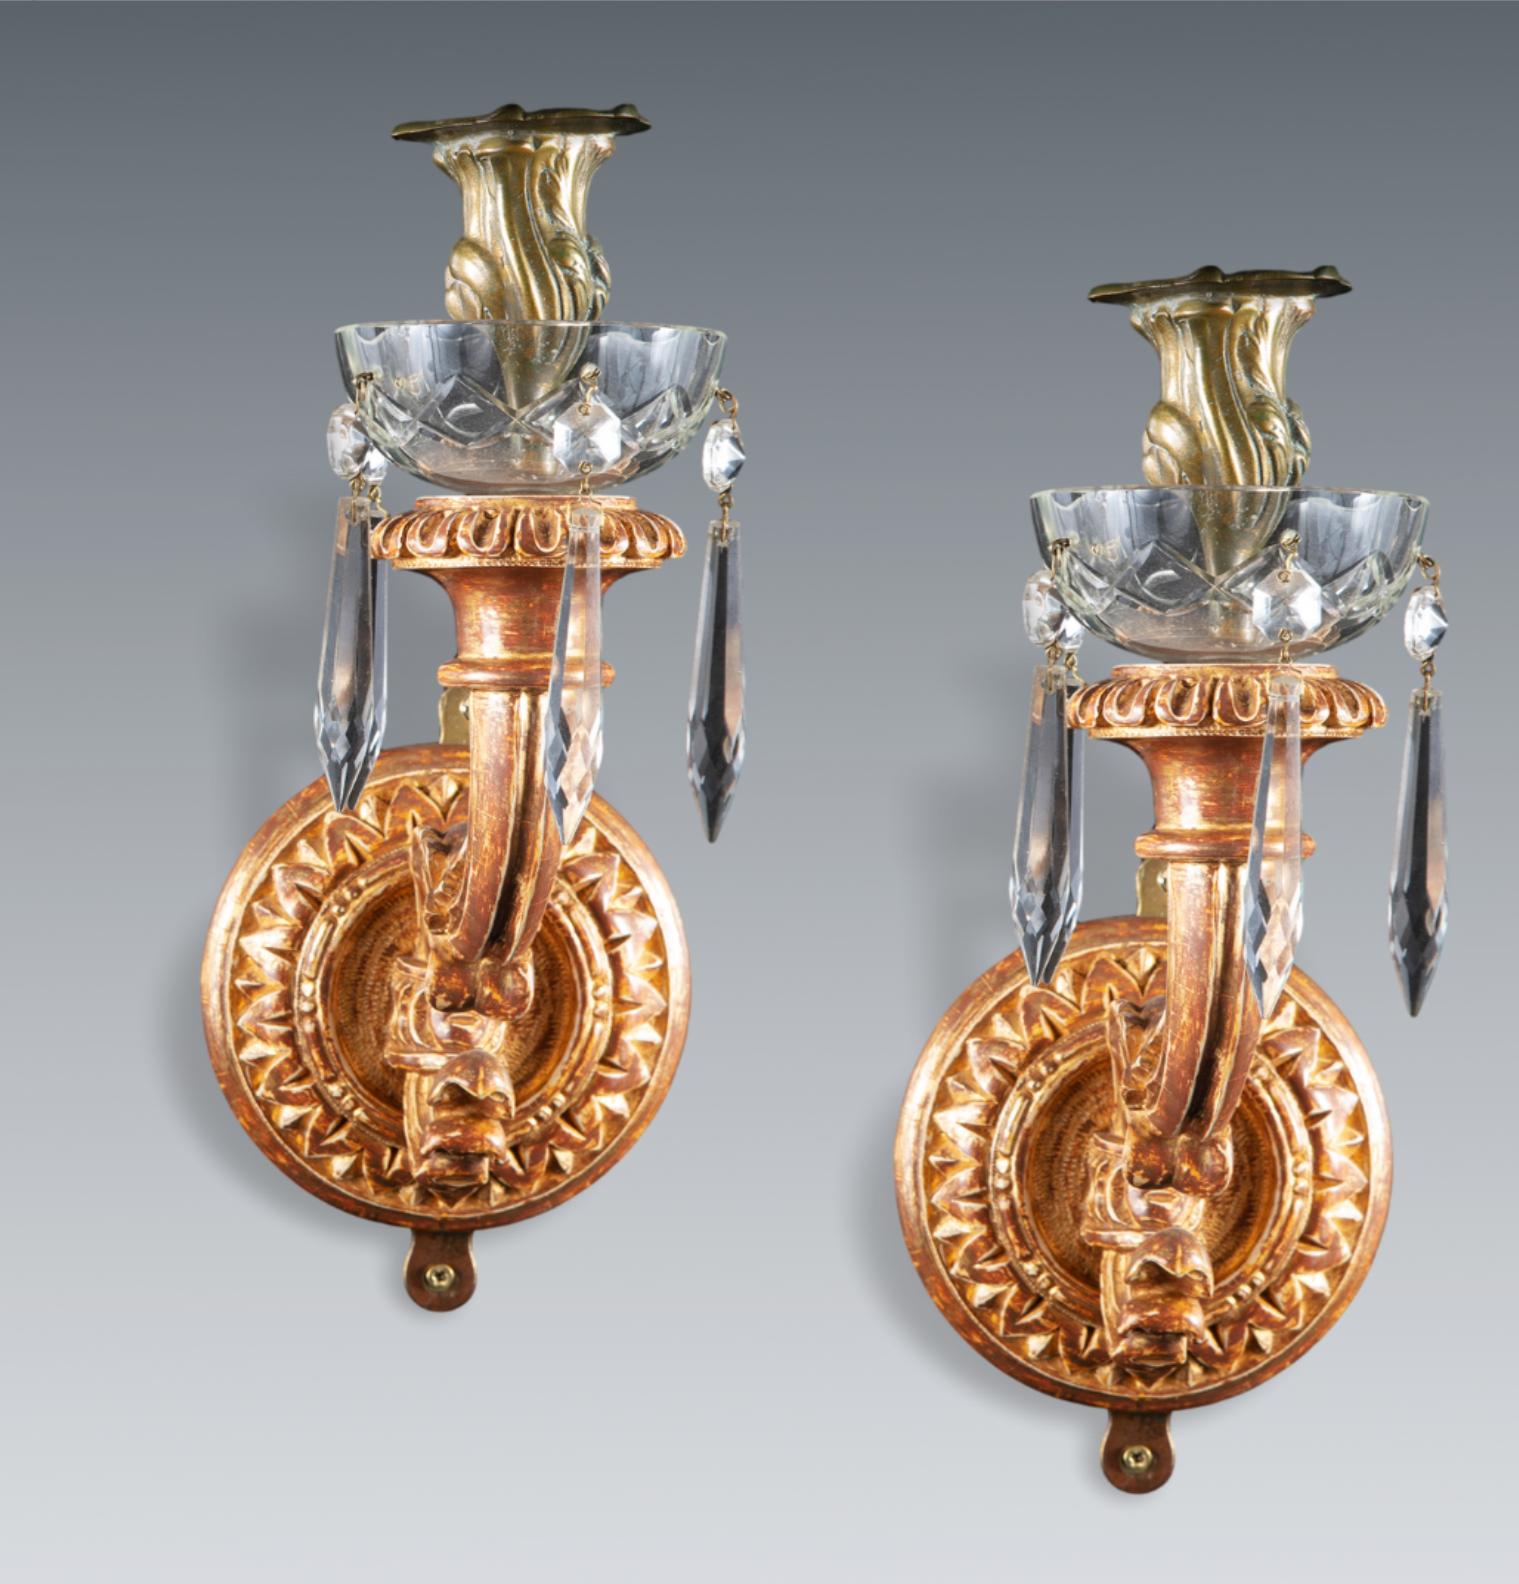 European Pair of Decorative Gilded Wall Sconces with Cut Glass Drops and Drip Pans For Sale